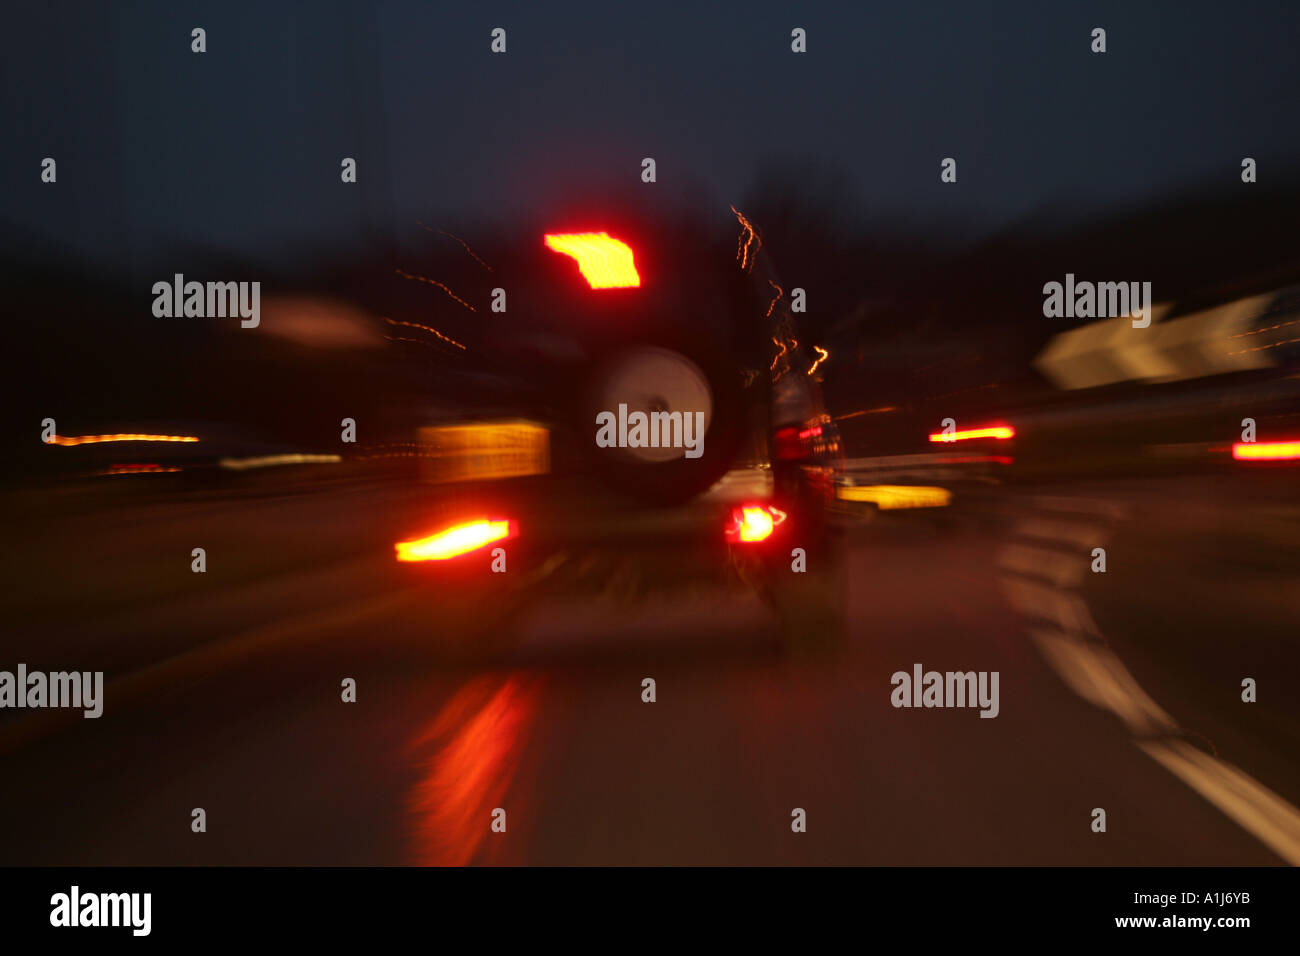 Drunk driving, blurred image of cars Stock Photo